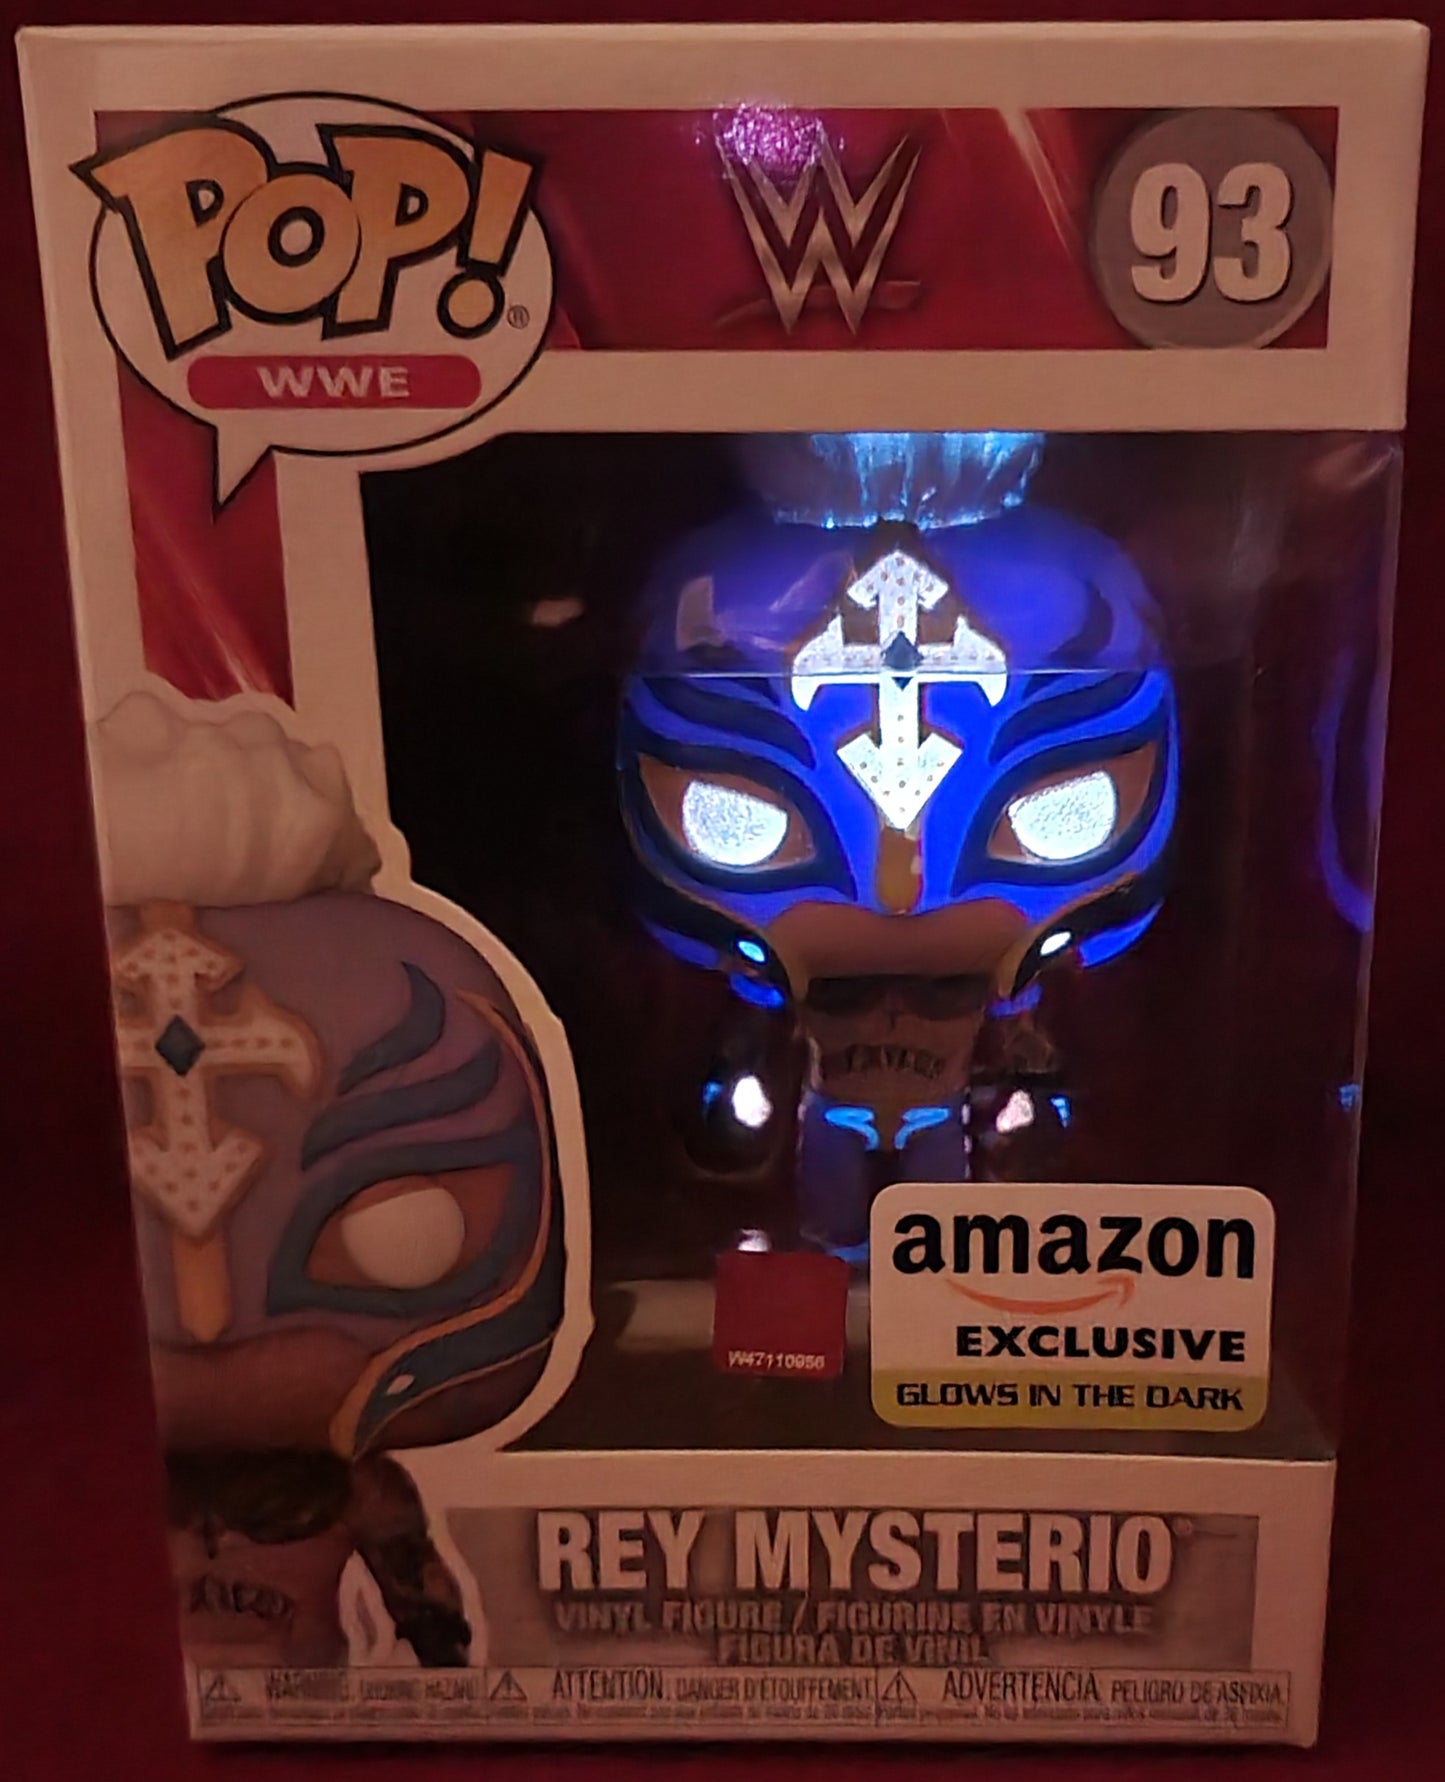 Rey mysterio amazon exclusive funko # 93 (nib)
brand new glow in the dark wwe mysterio funko pop. pop has one damaged too back corner and will be shipped in a compatible pop protector.